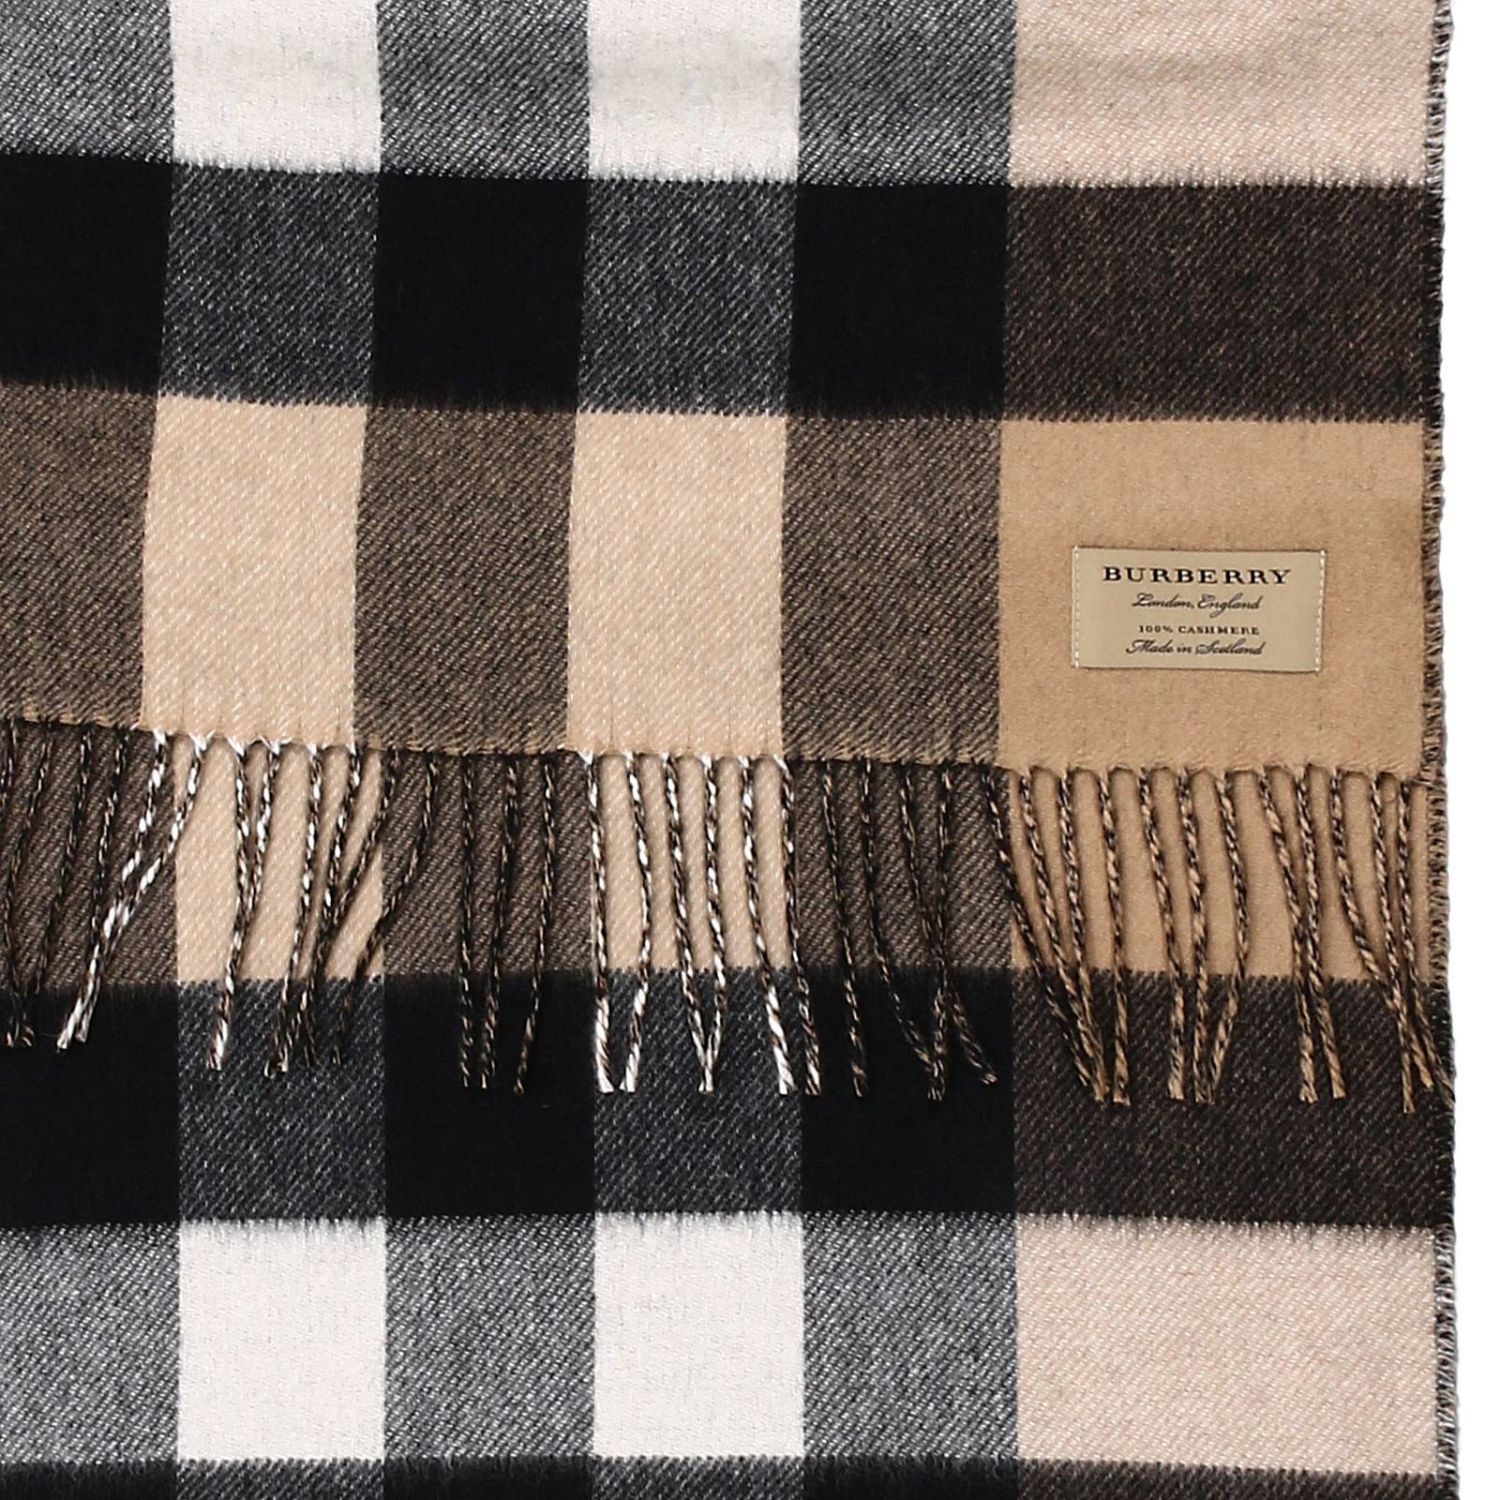 Burberry Outlet: Scarf men | Scarf Burberry Men Beige | Scarf Burberry ...